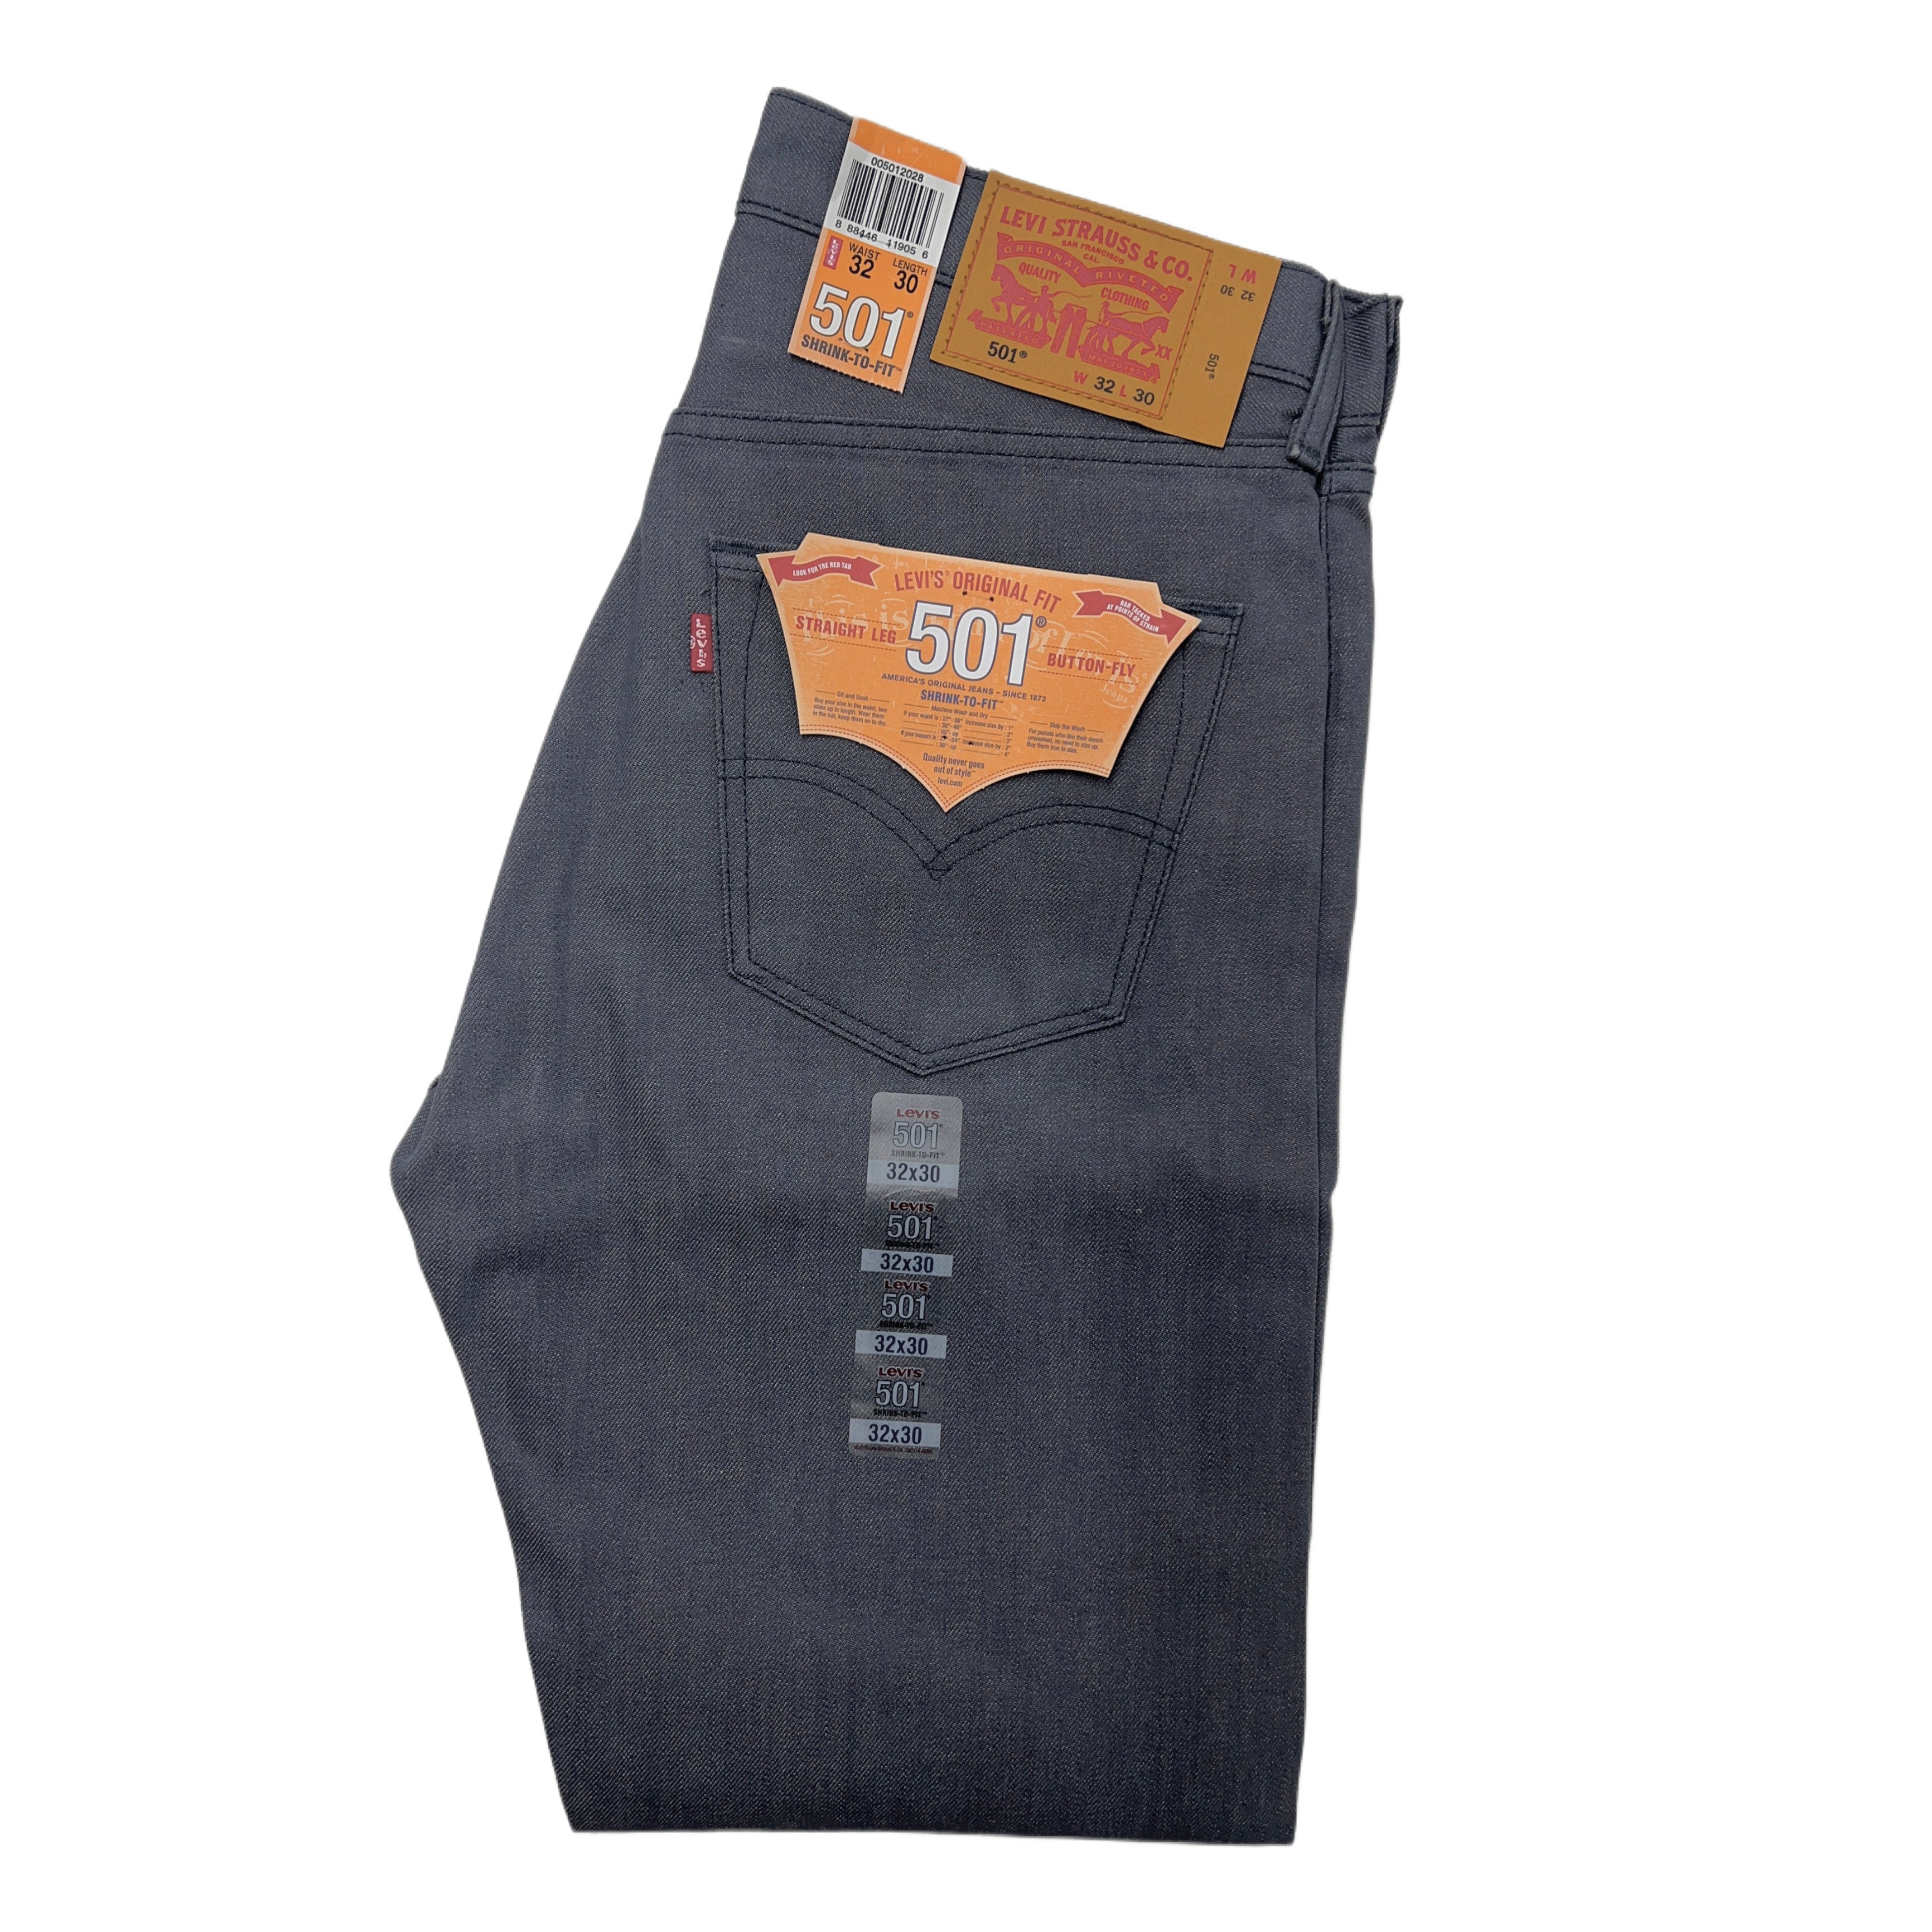 Levi's 501 Shrink-to-Fit - Ash Charcoal - 2028